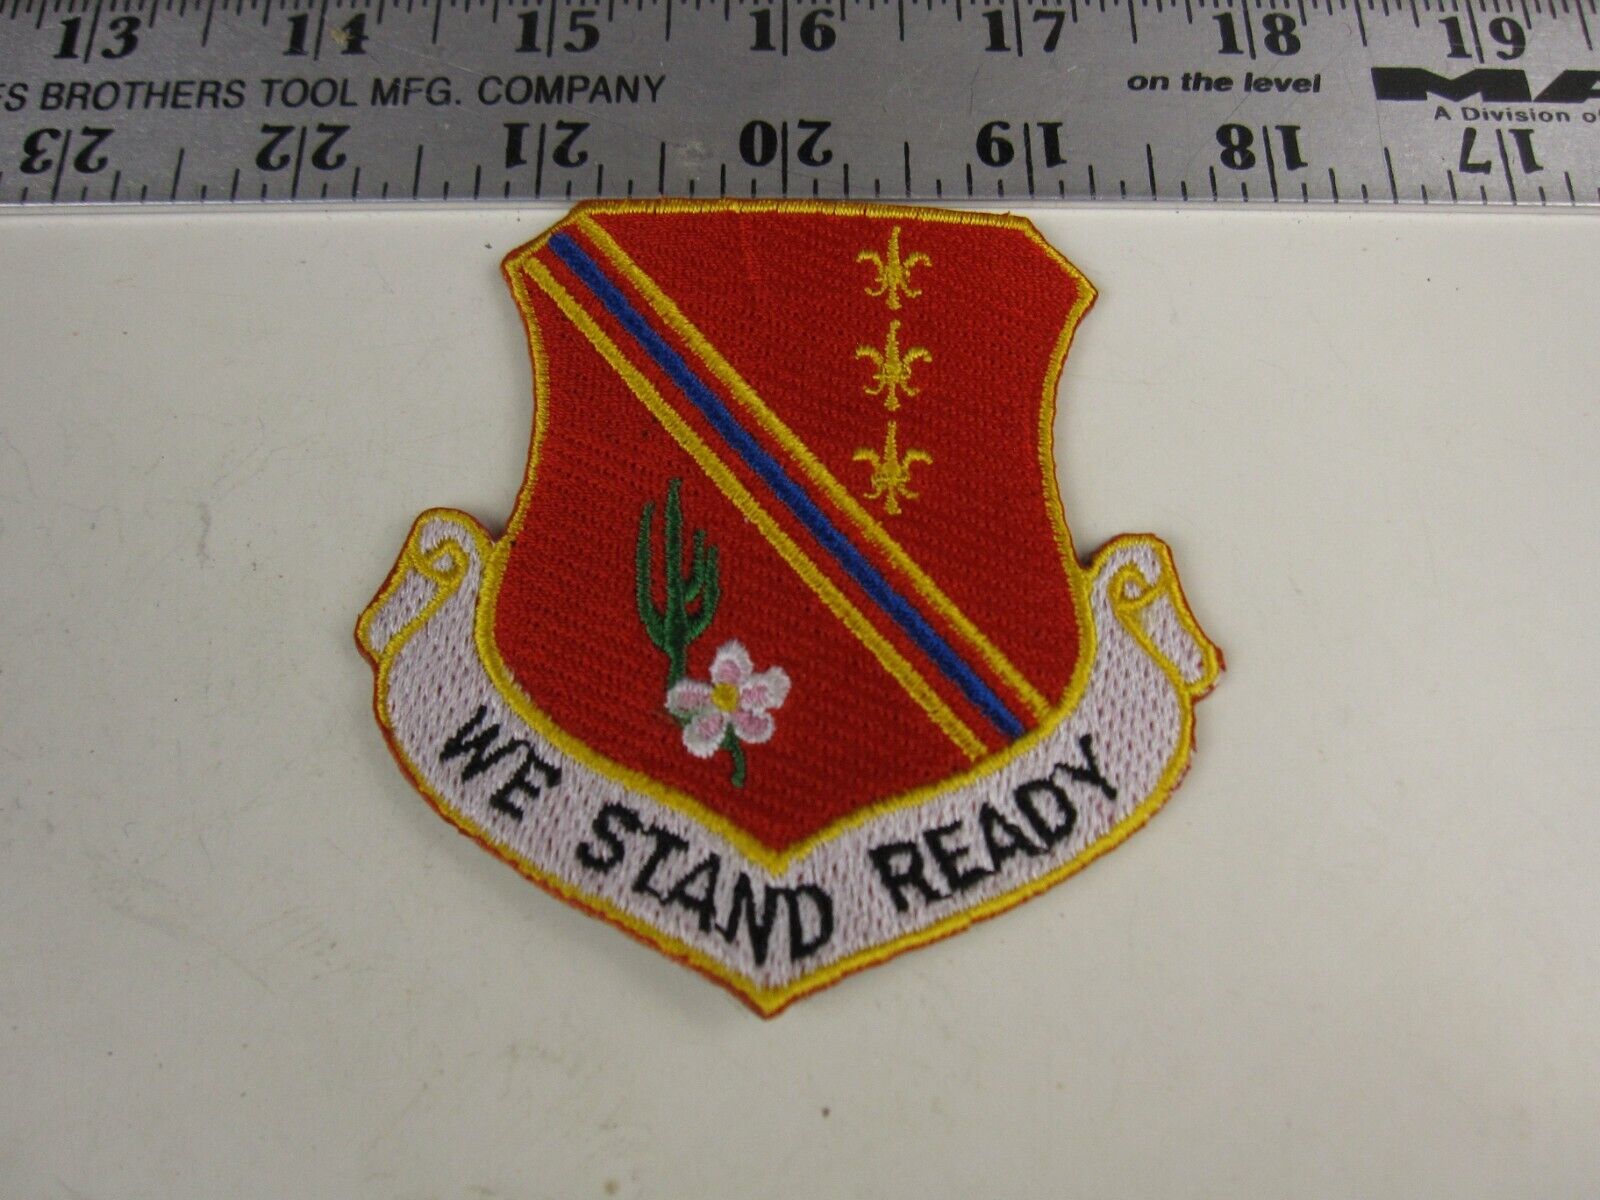 Vintage We Stand Ready Shield Style Military Related Patch